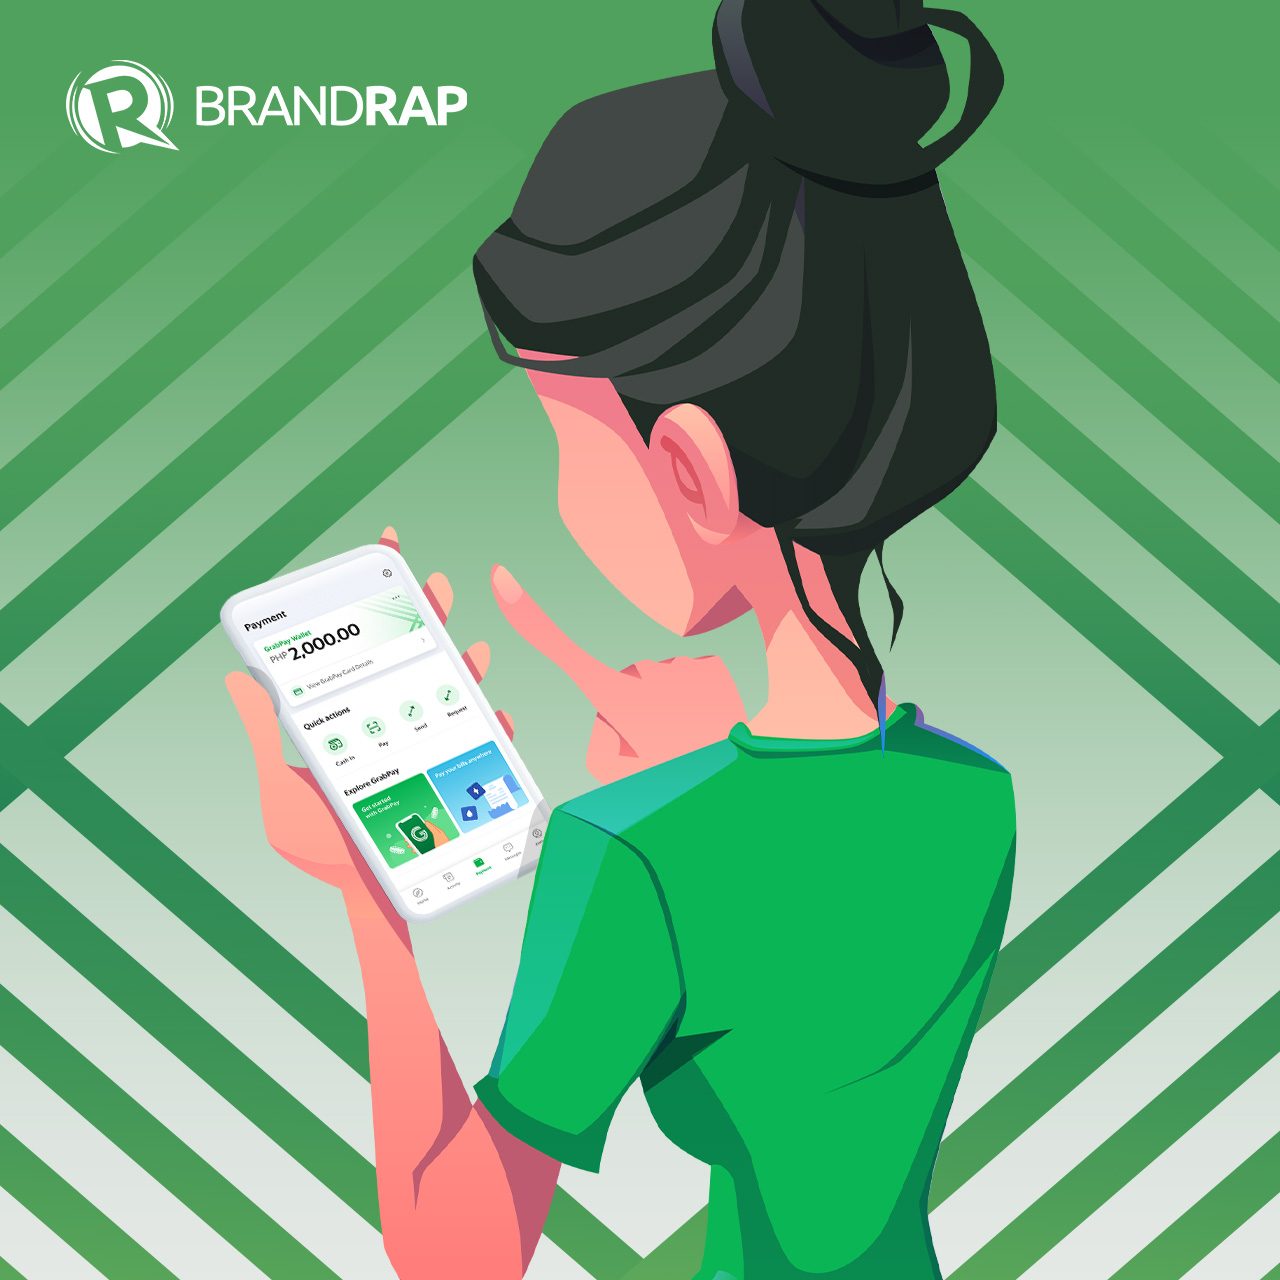 Still not using GrabPay? Here are the valuable perks you’re missing out on